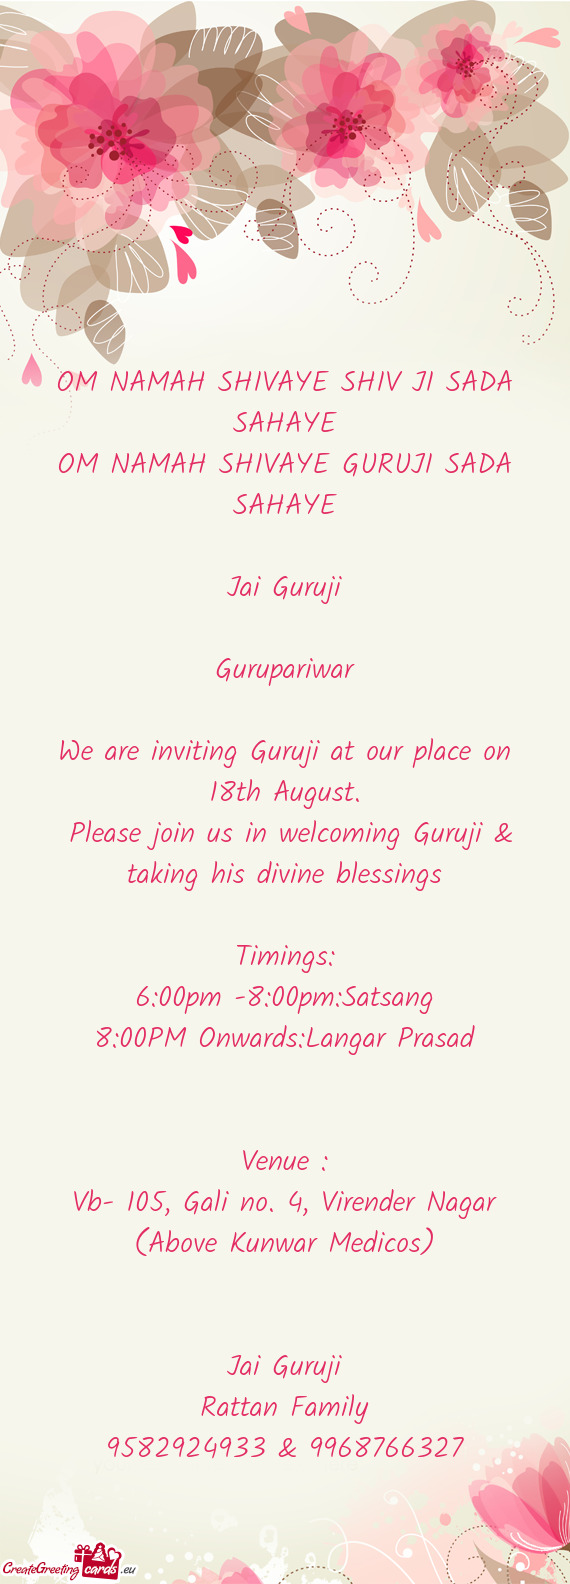 We are inviting Guruji at our place on 18th August